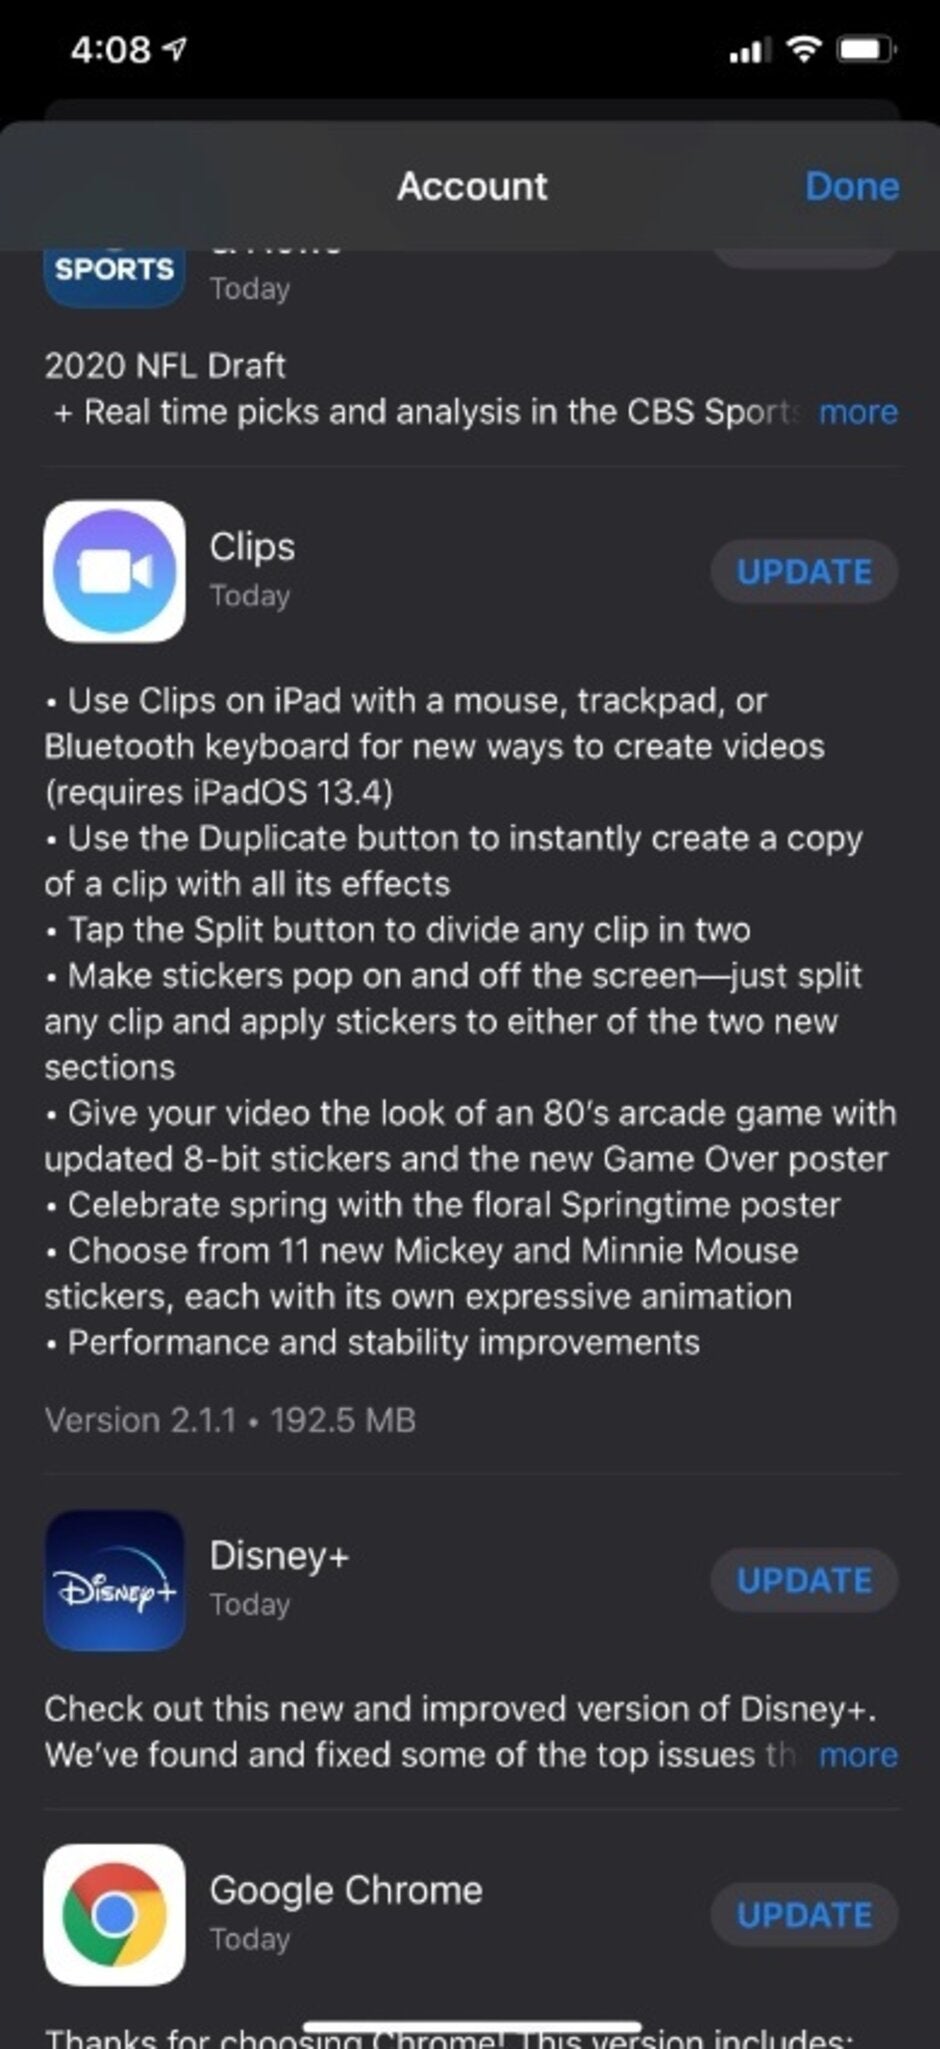 The Clips video creation app is updated to version 2.1.1 - Apple updates iOS, iPadOS and the Clips video creation app